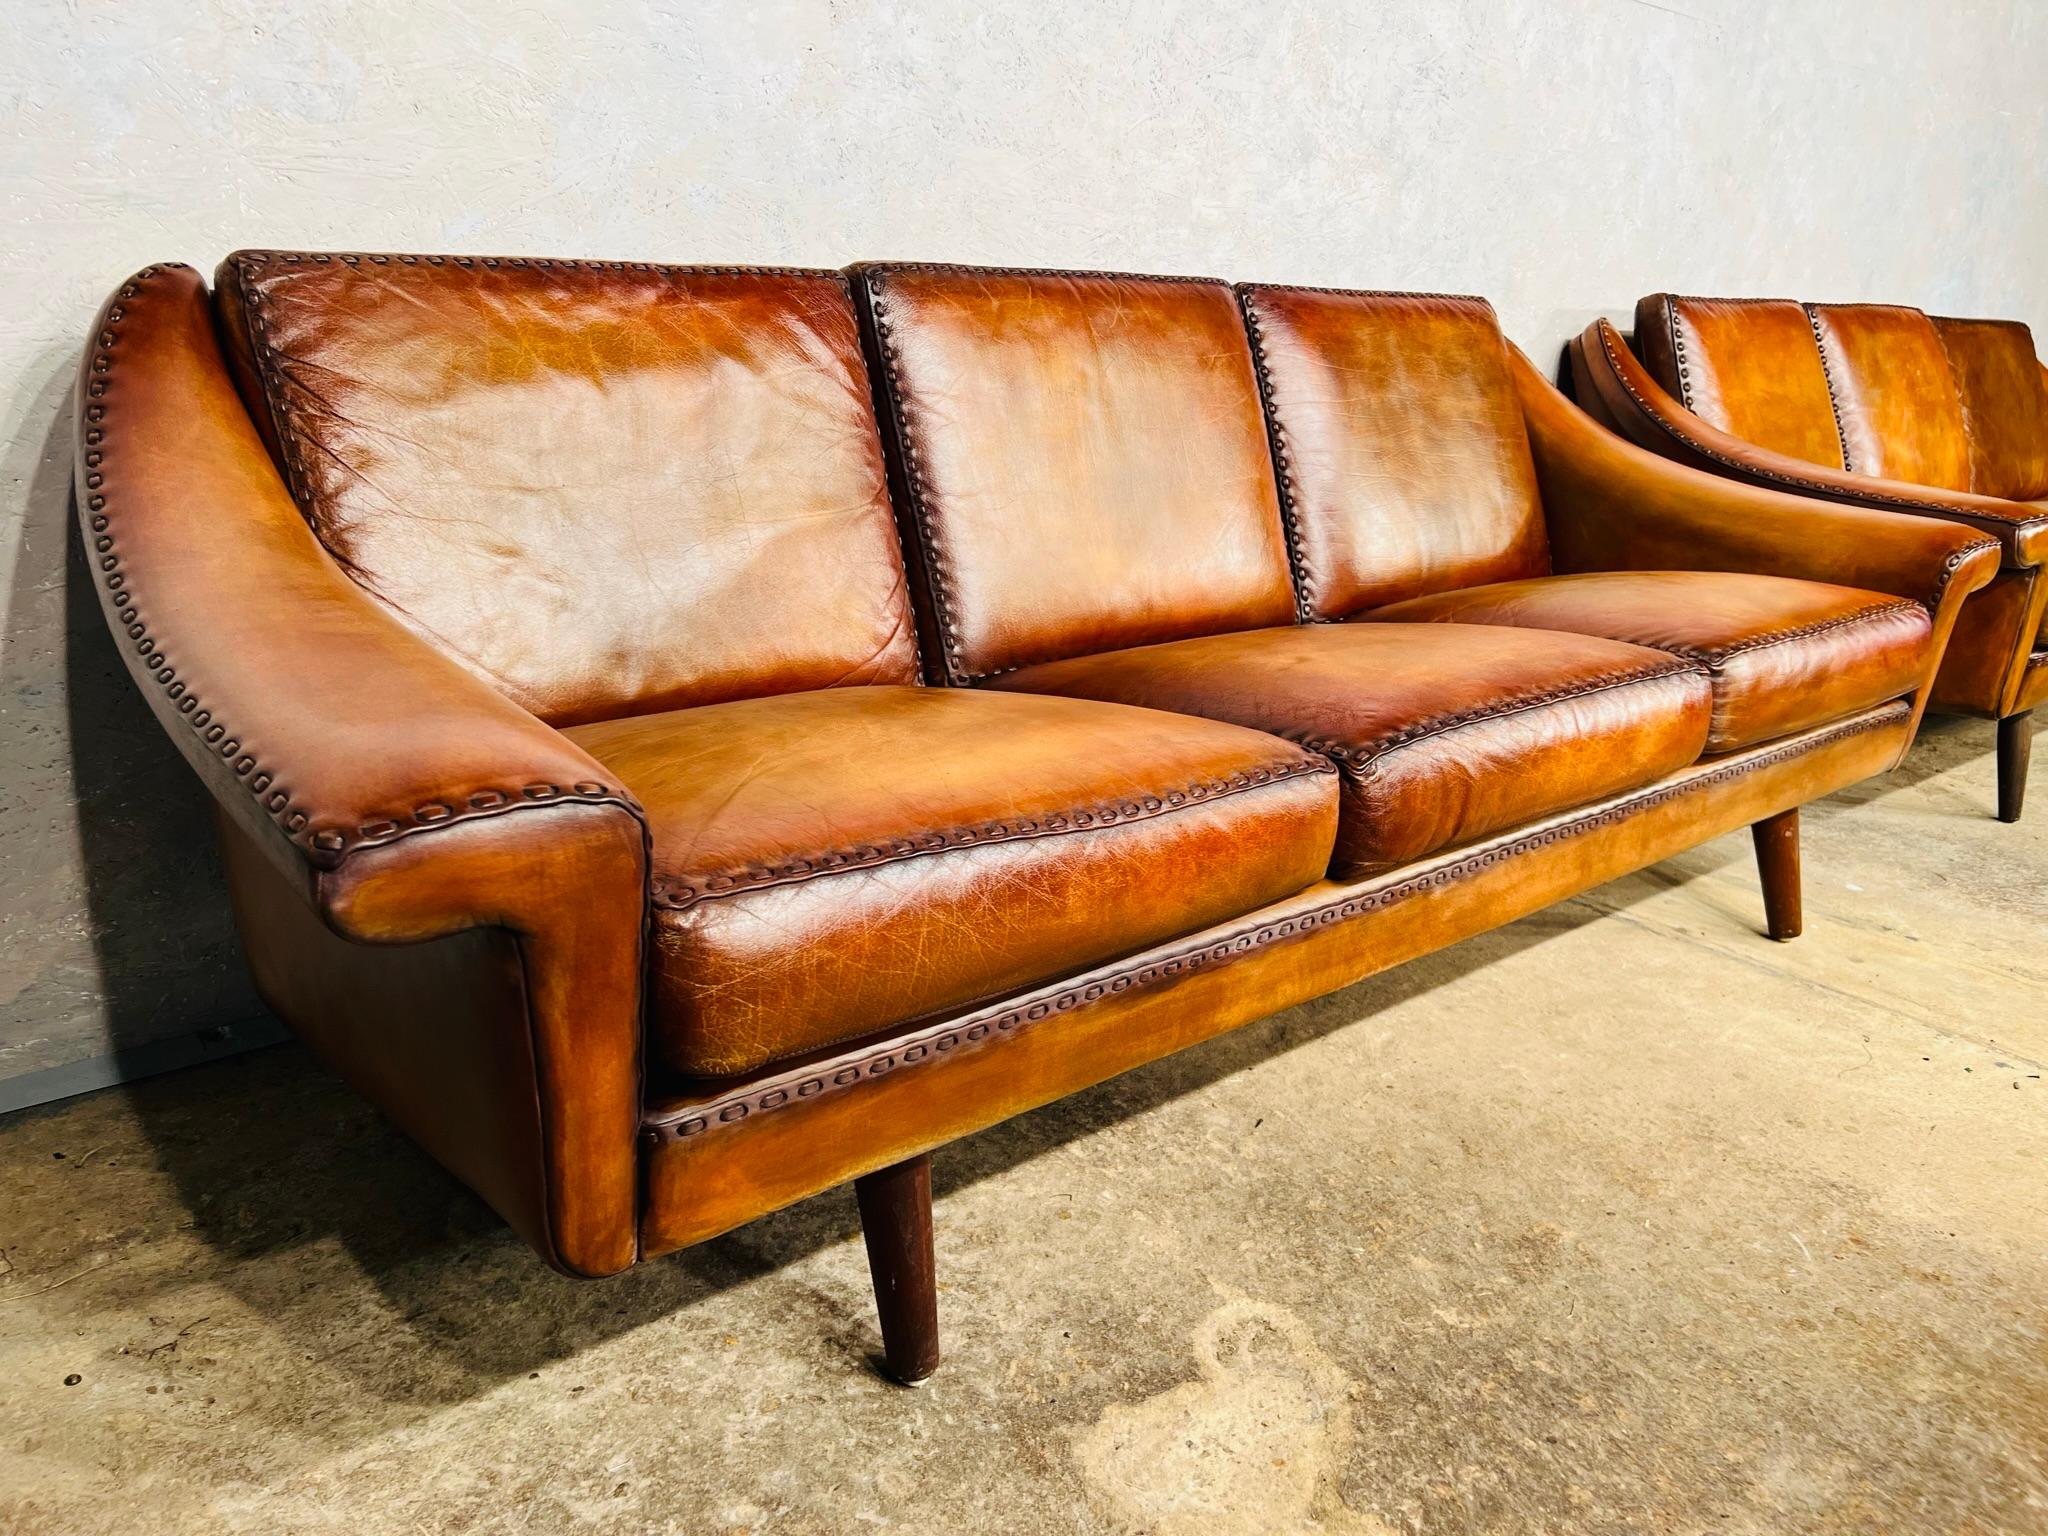 Pair Of Matador Leather 3 Seater Sofa by Aage Christiansen for Eran 1960s #642 For Sale 5